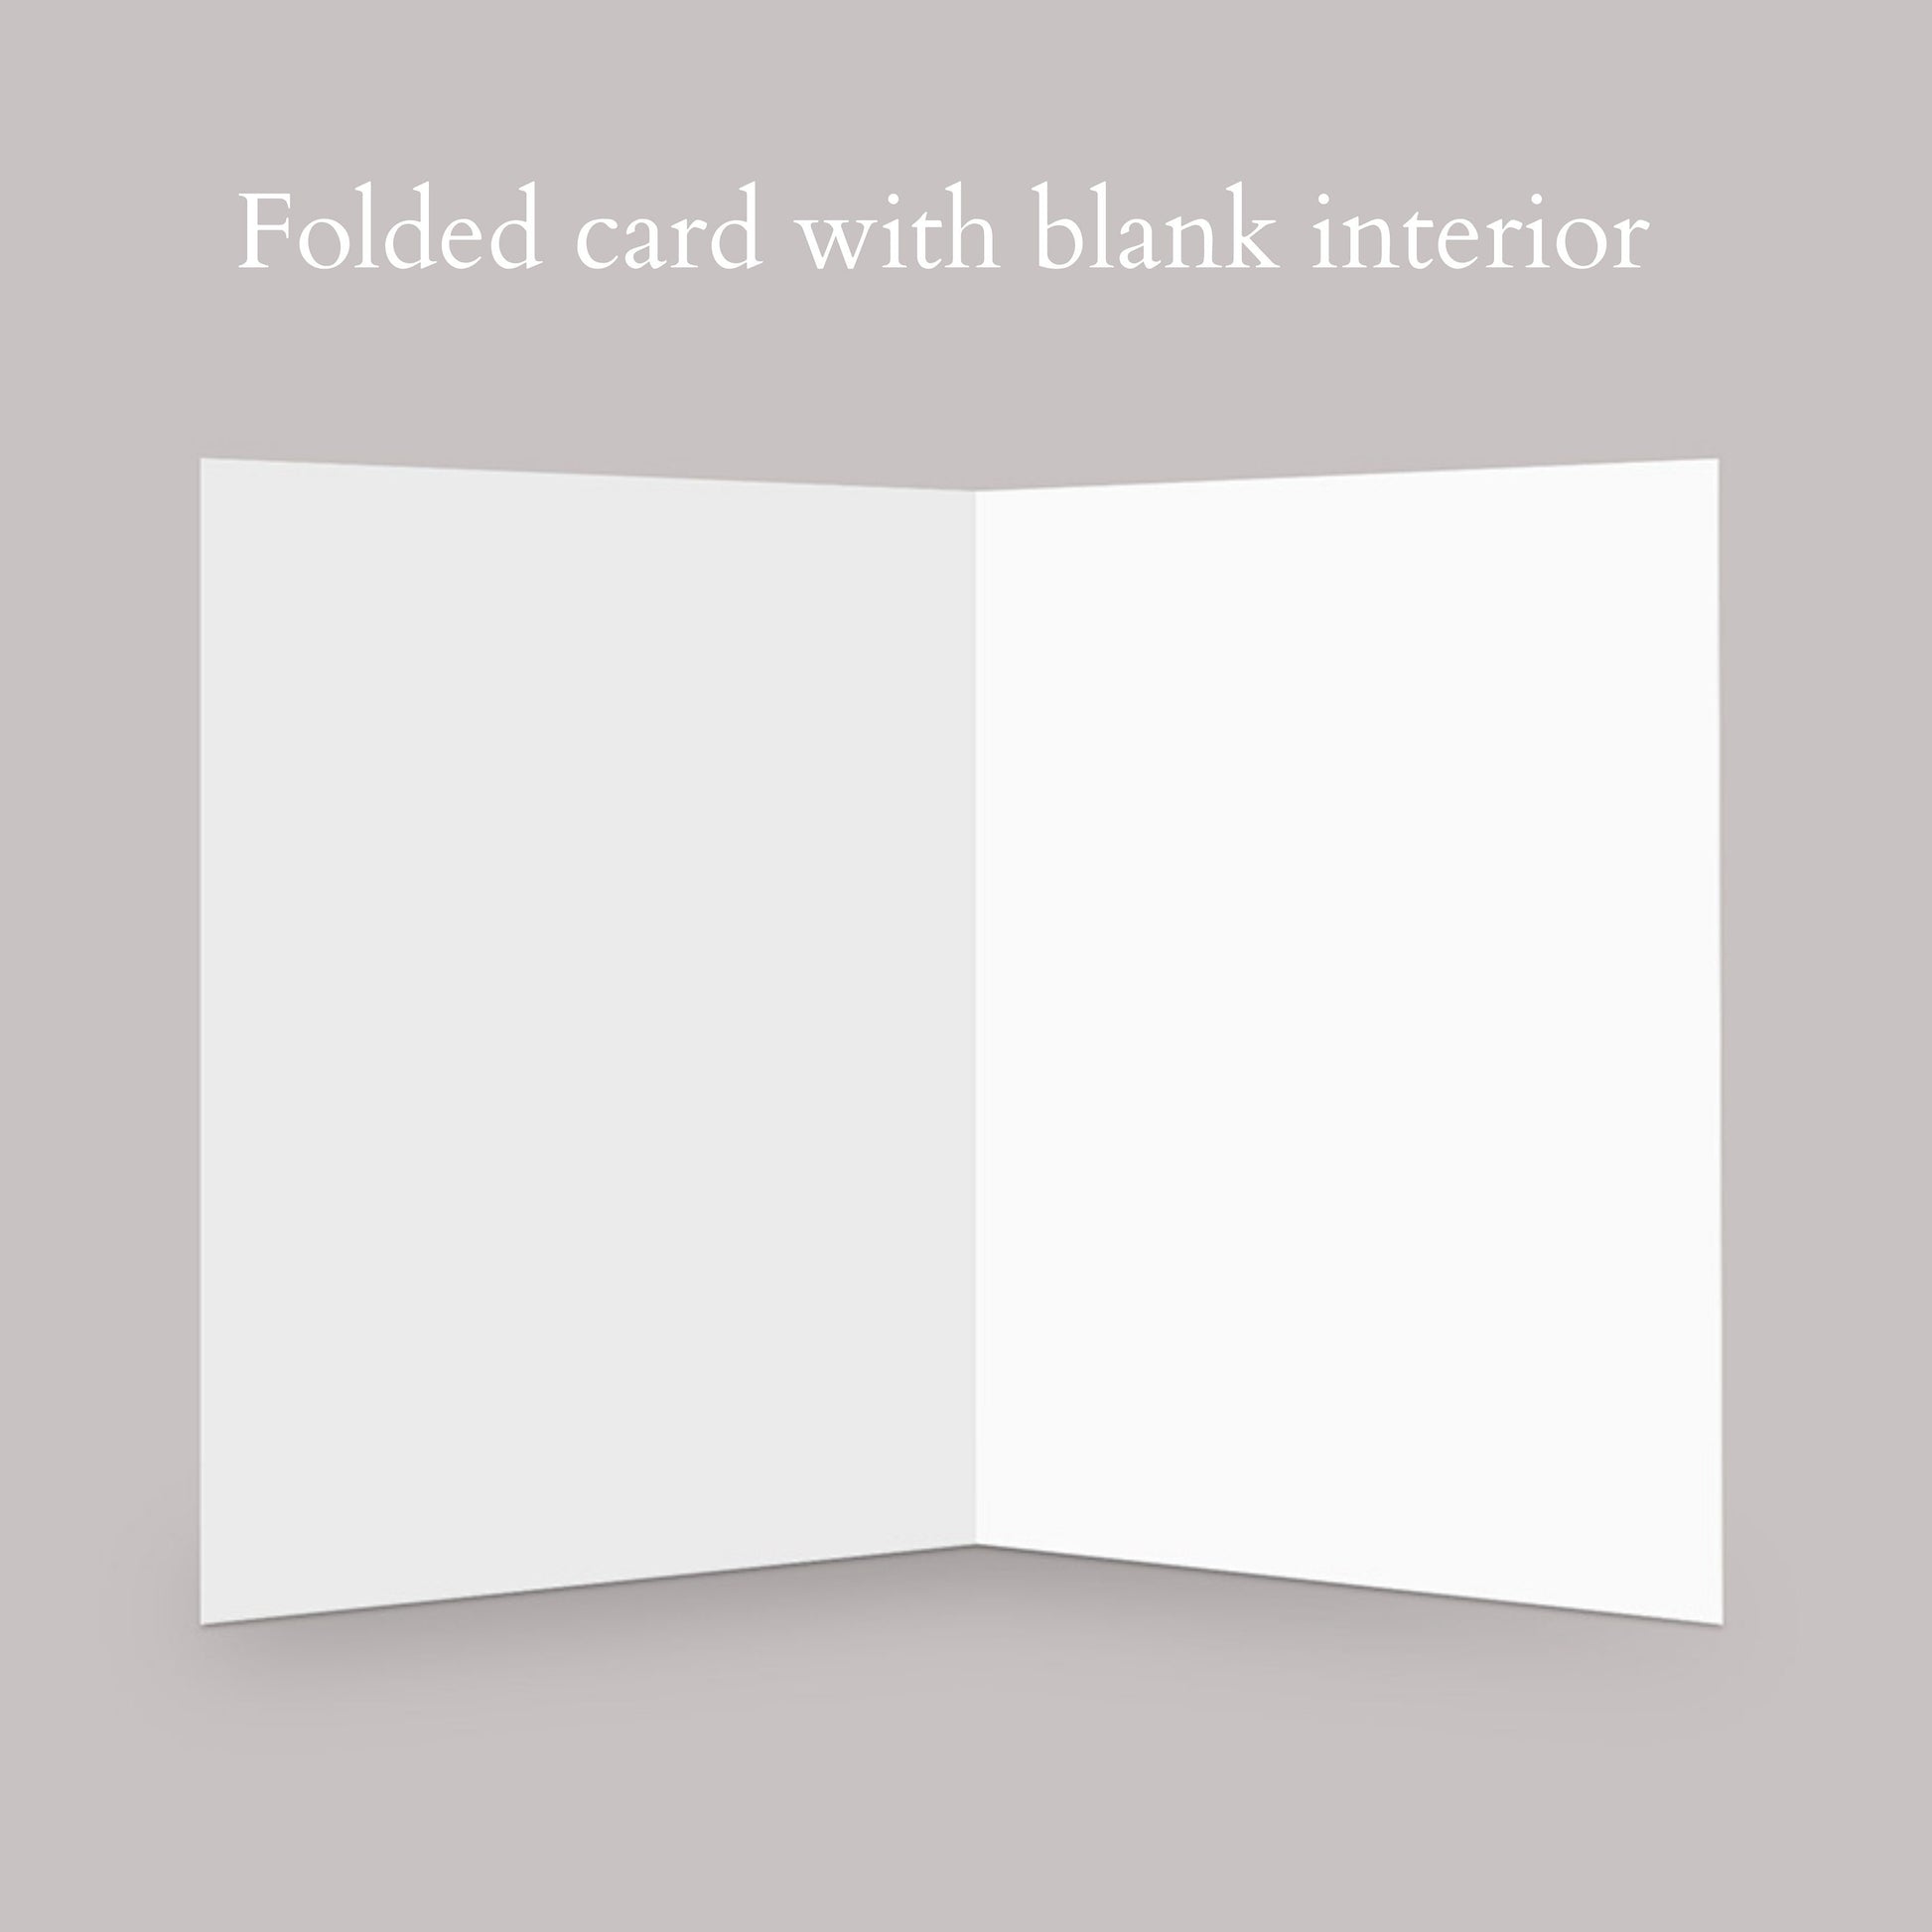 blank interior in this card